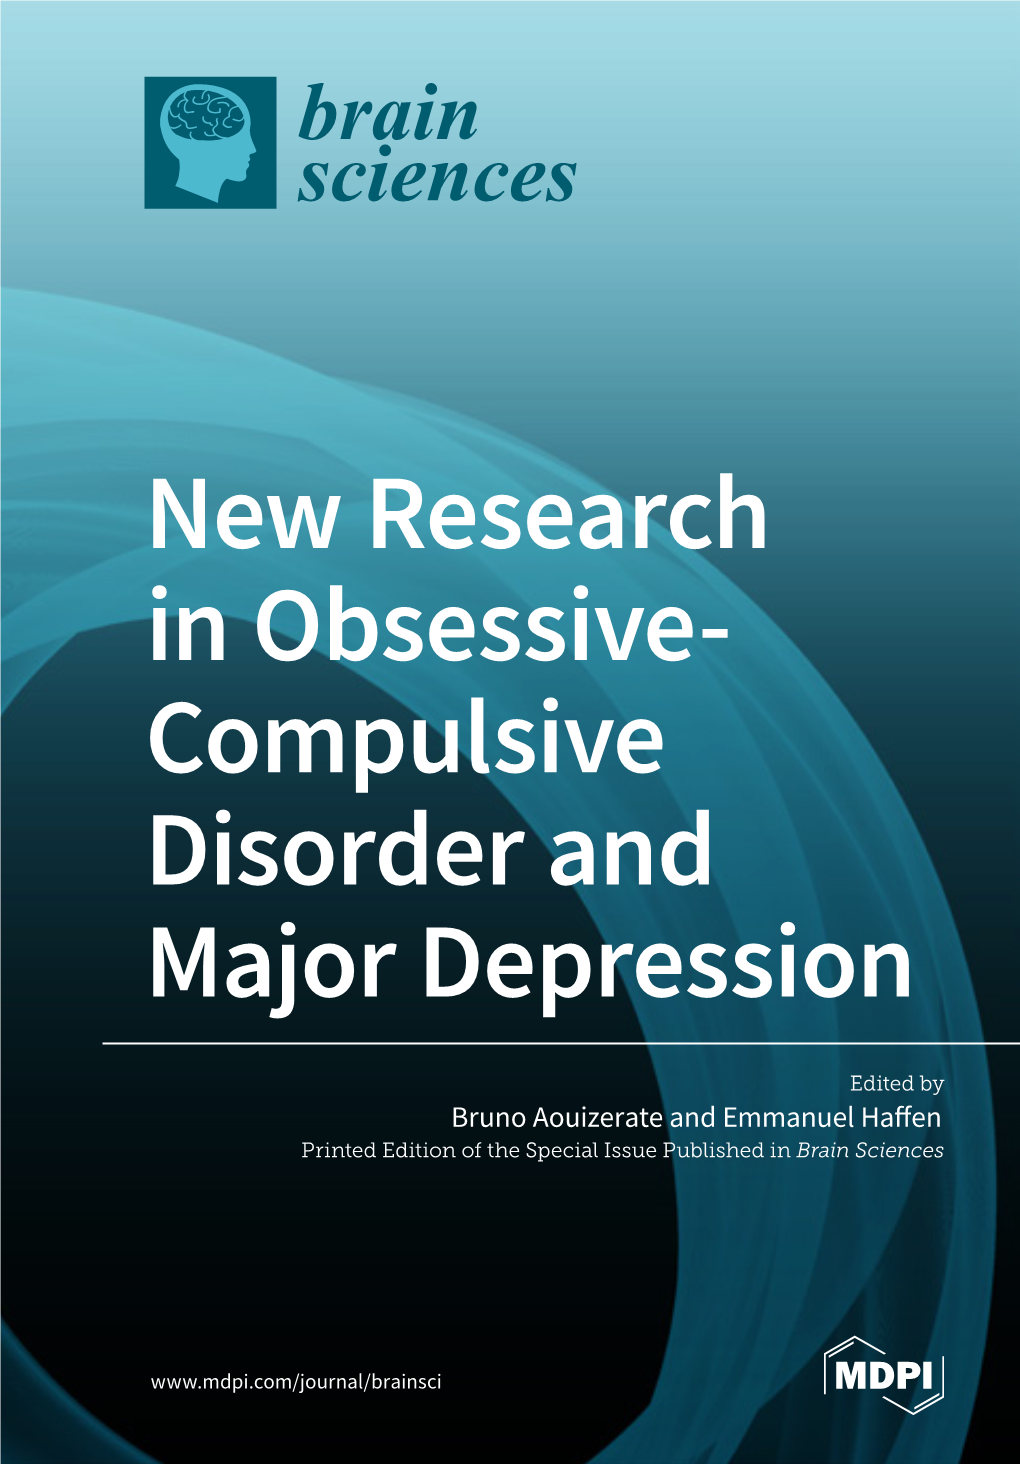 New Research in Obsessive- Compulsive Disorder and Major Depression